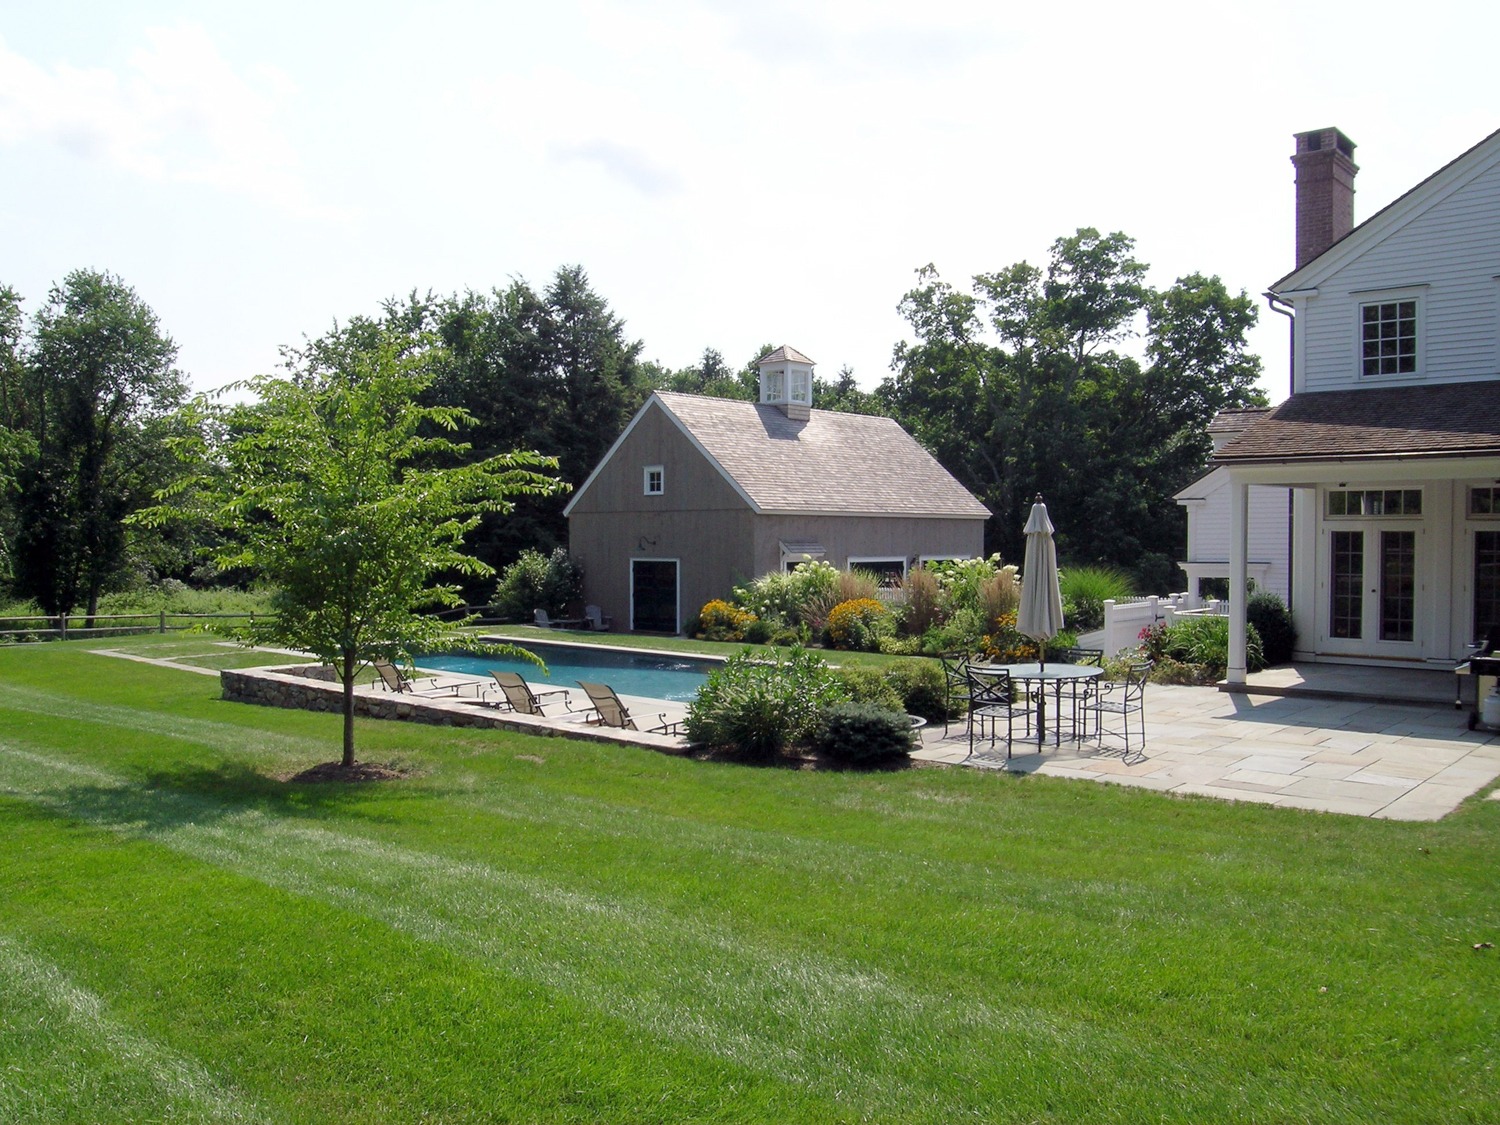 This image shows a lush backyard with a swimming pool, a patio area with furniture, a well-manicured lawn, and traditional-style houses under a clear sky.